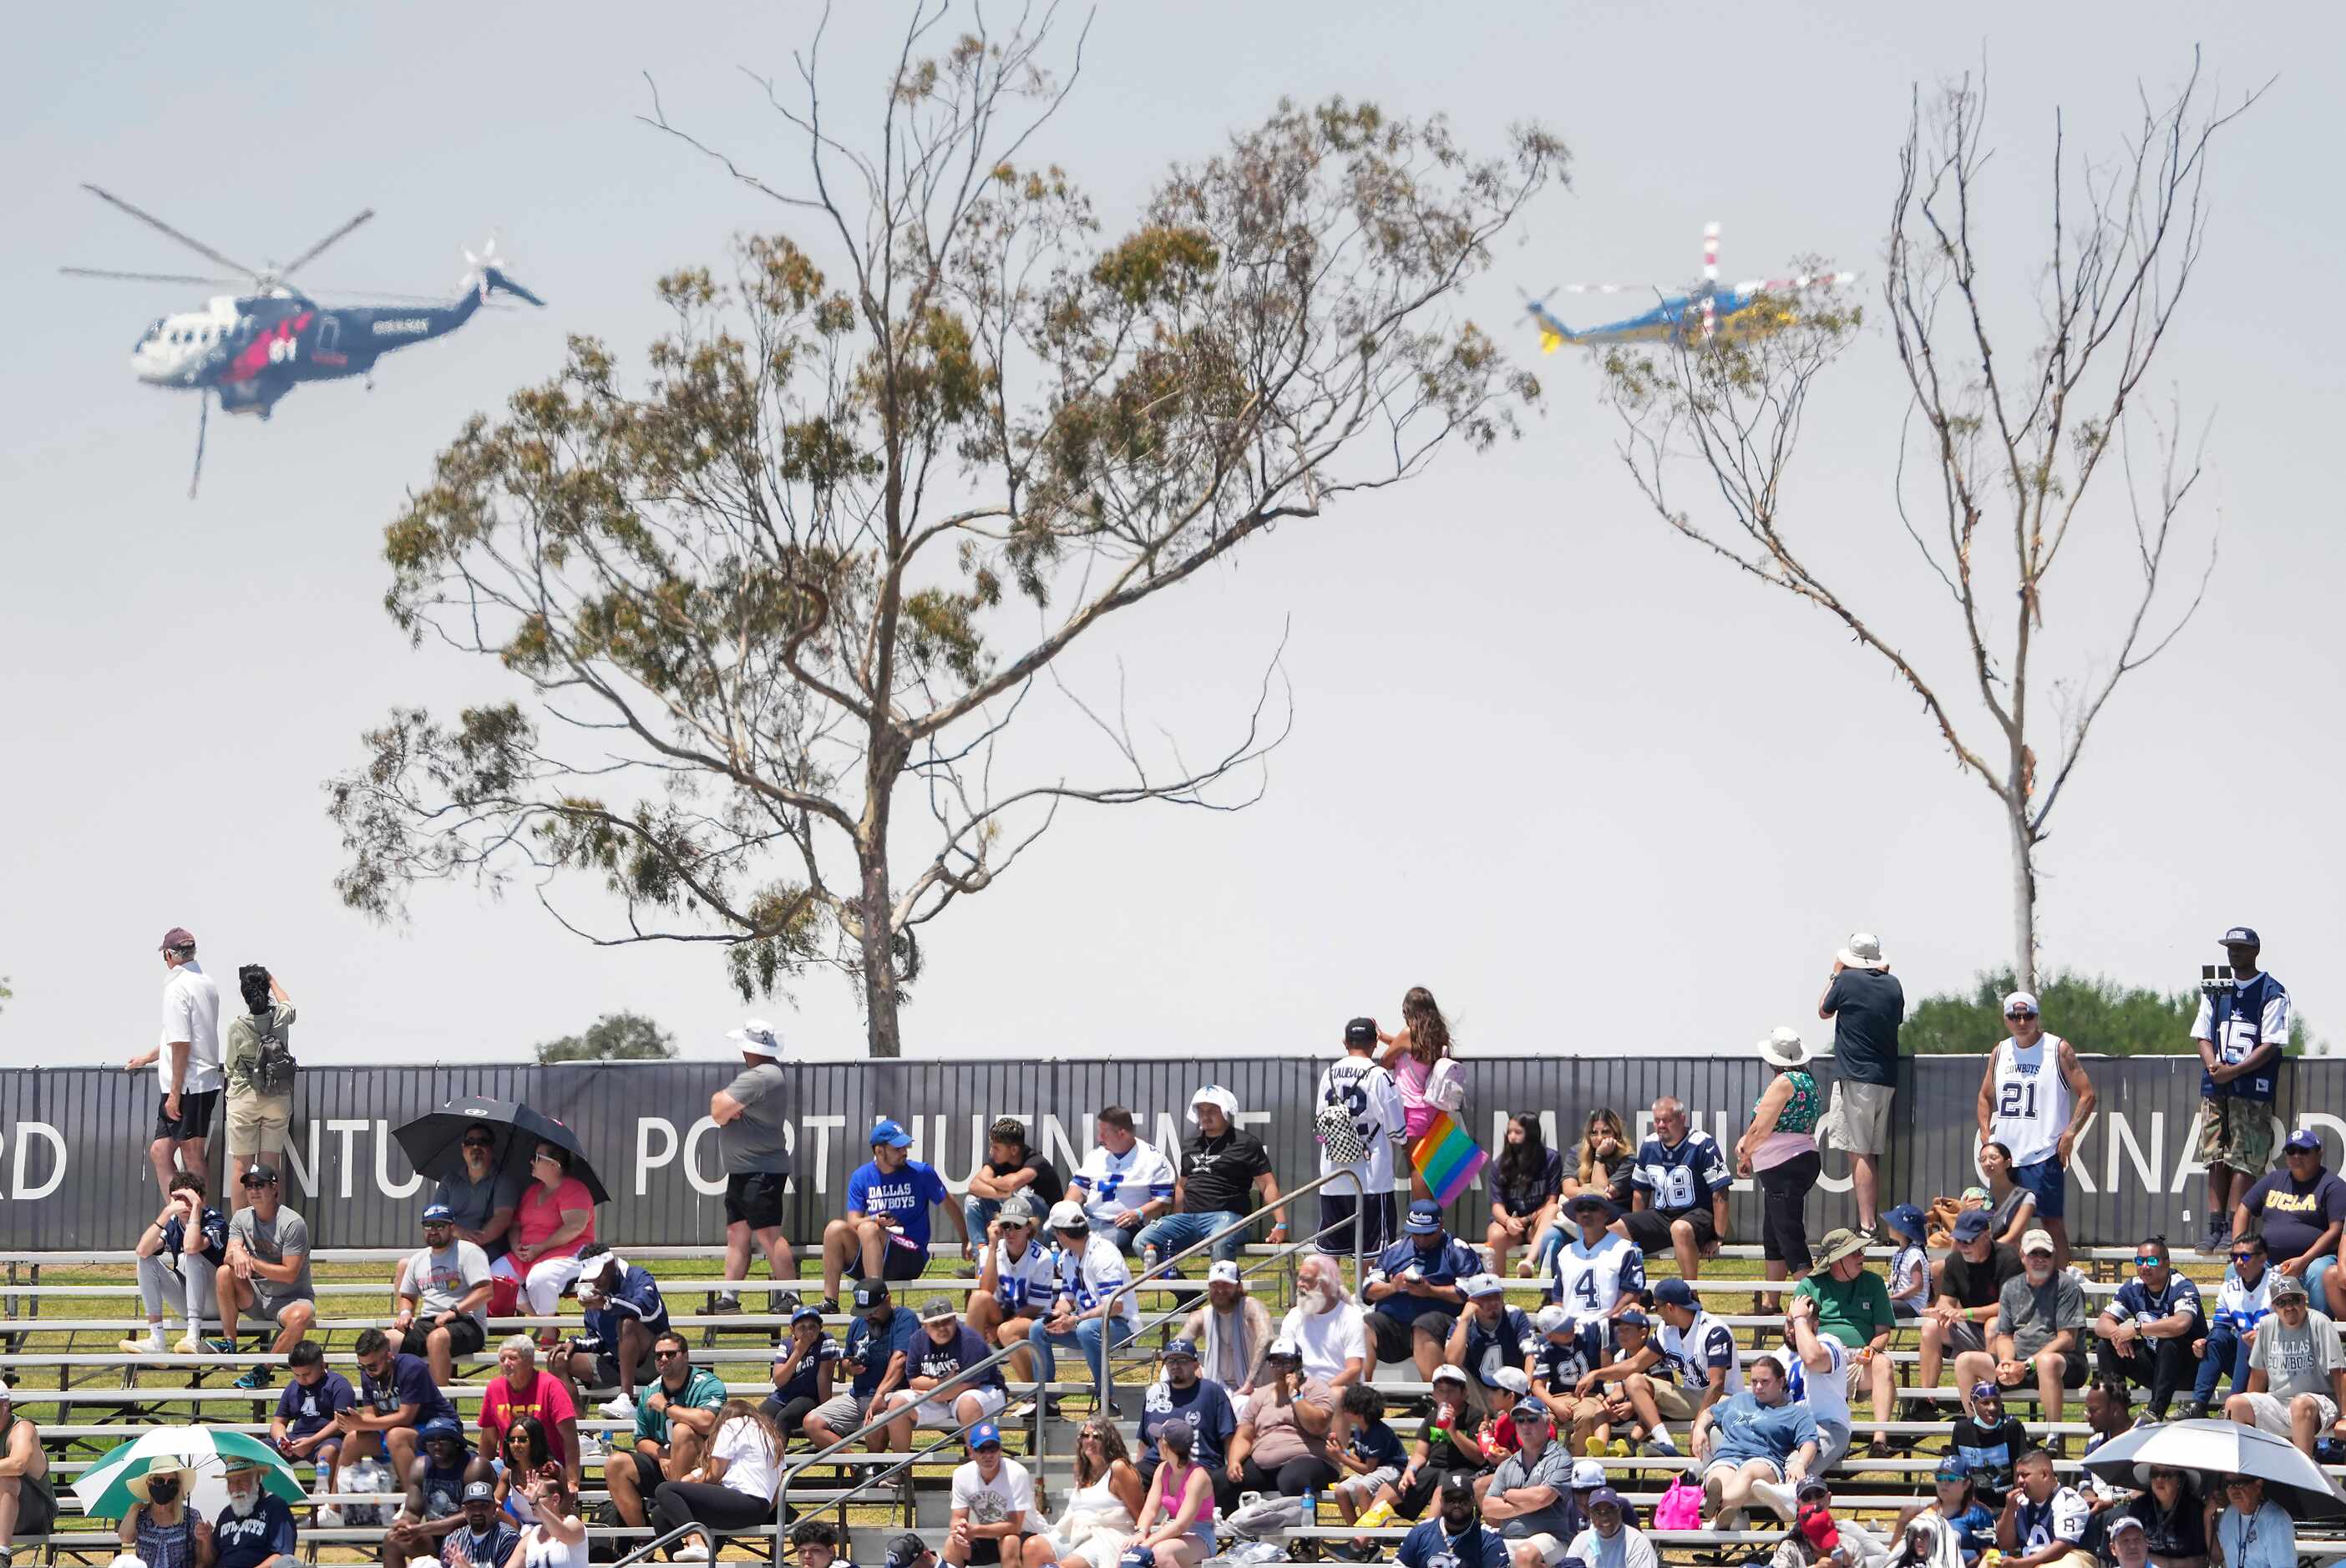 Fans watch as firefighting helicopters work near the facility during Dallas Cowboys practice...